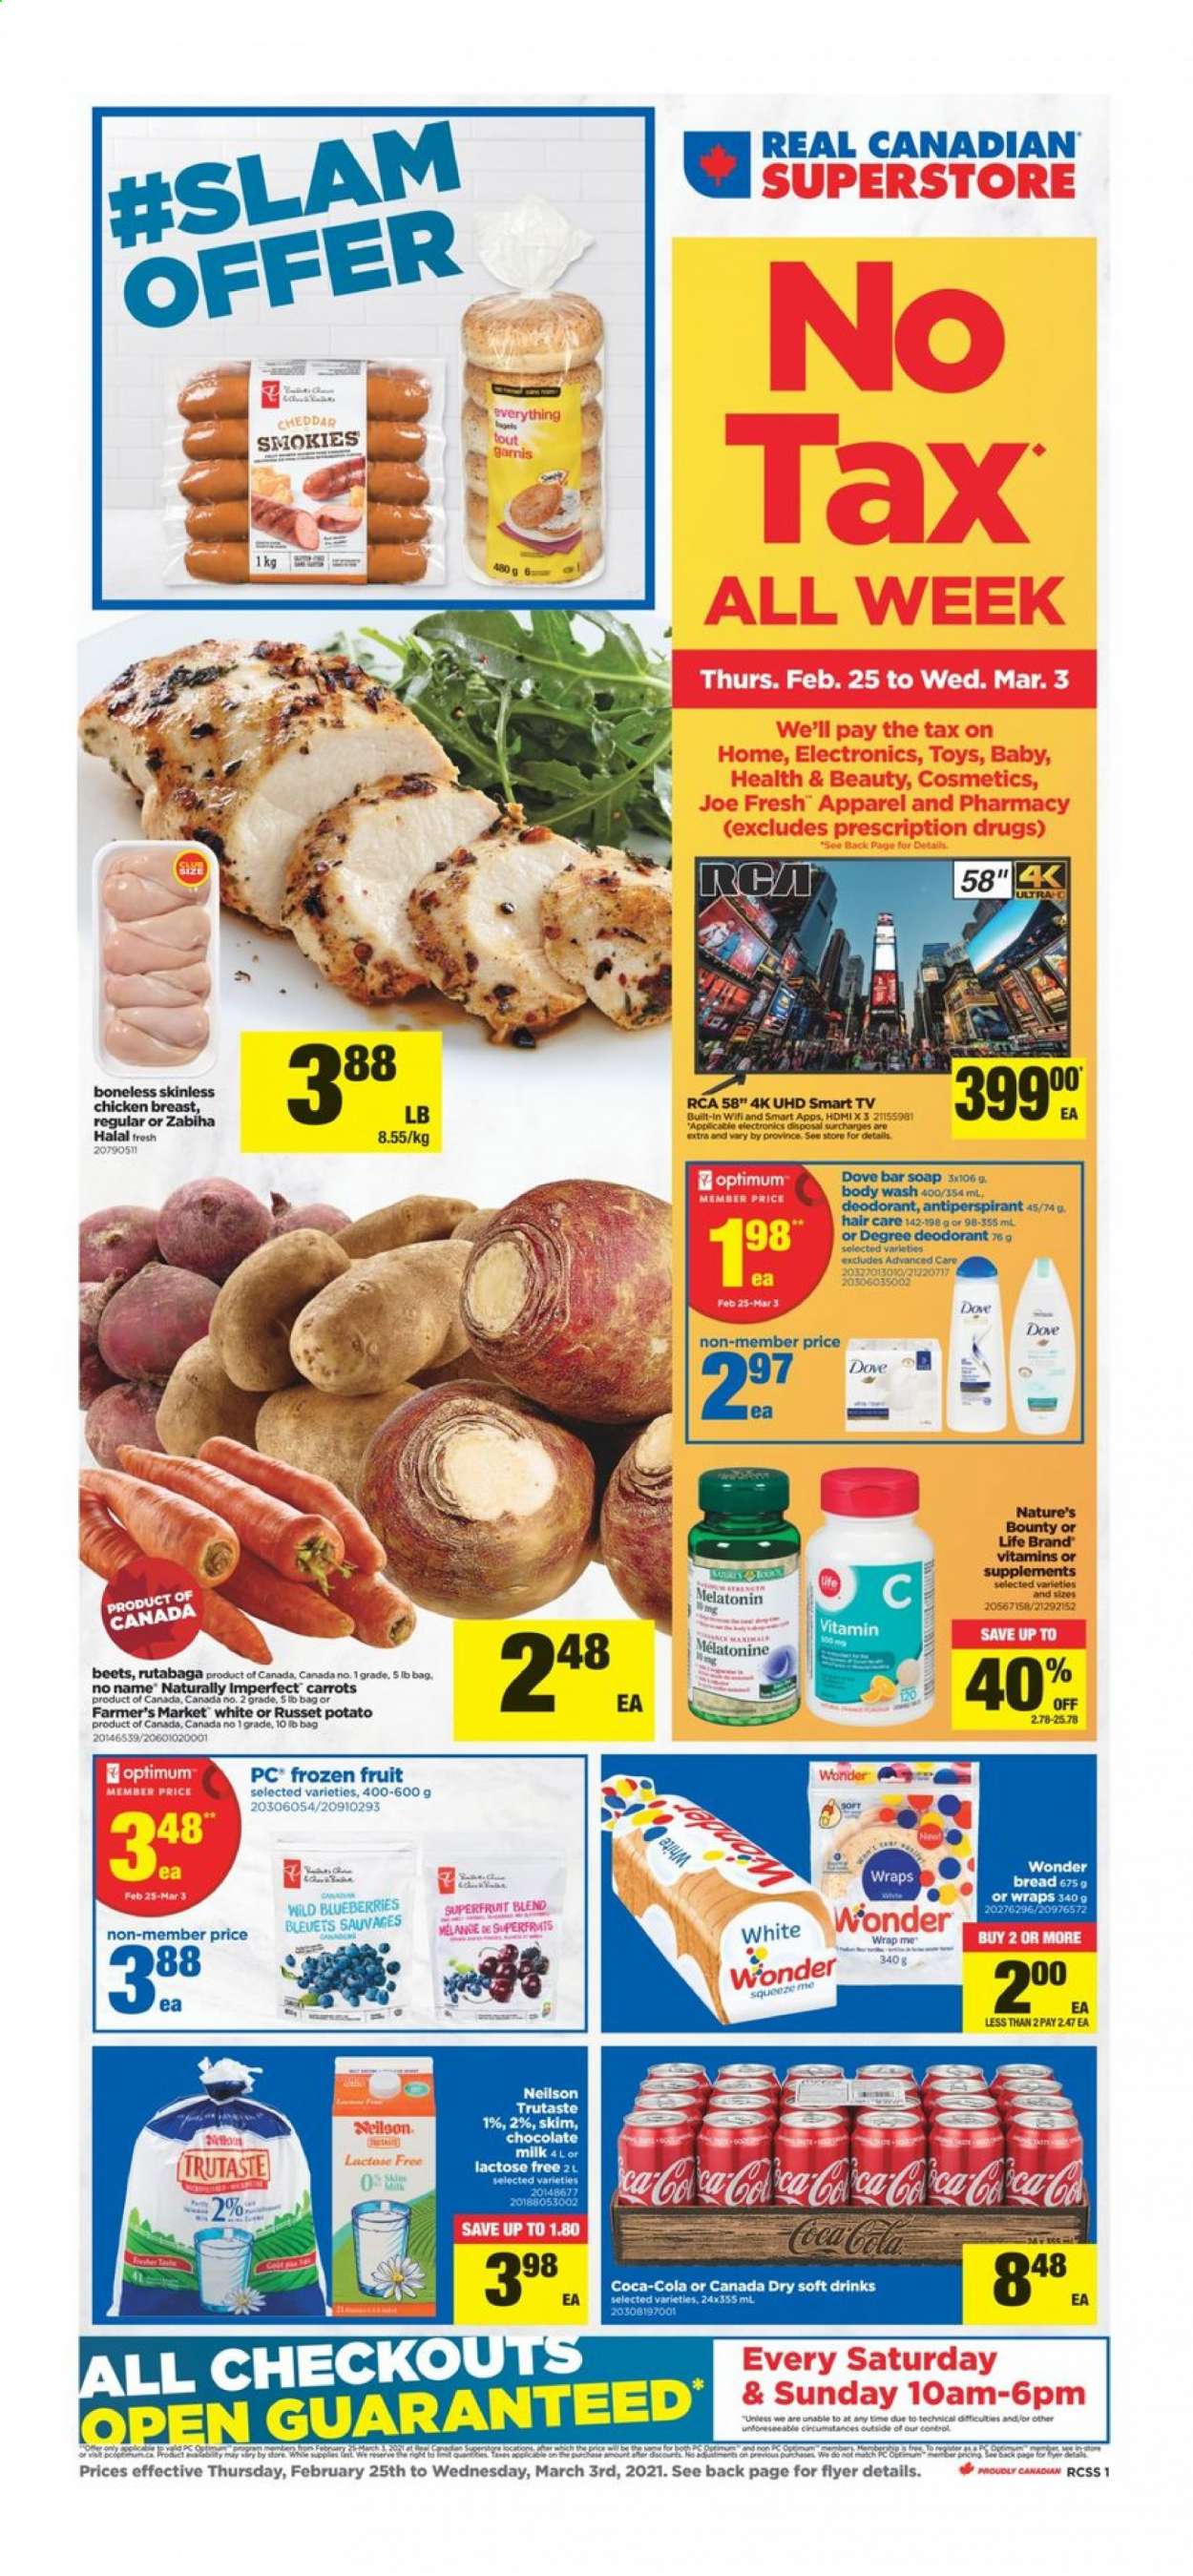 thumbnail - Real Canadian Superstore Flyer - February 25, 2021 - March 03, 2021 - Sales products - bread, wraps, carrots, russet potatoes, blueberries, No Name, cheddar, cheese, milk, milk chocolate, chocolate, Canada Dry, Coca-Cola, soft drink, chicken breasts, chicken, body wash, soap bar, soap, anti-perspirant, Optimum, RCA, UHD TV, TV, toys, Melatonin, Nature's Bounty, rutabaga, smart tv, deodorant. Page 1.